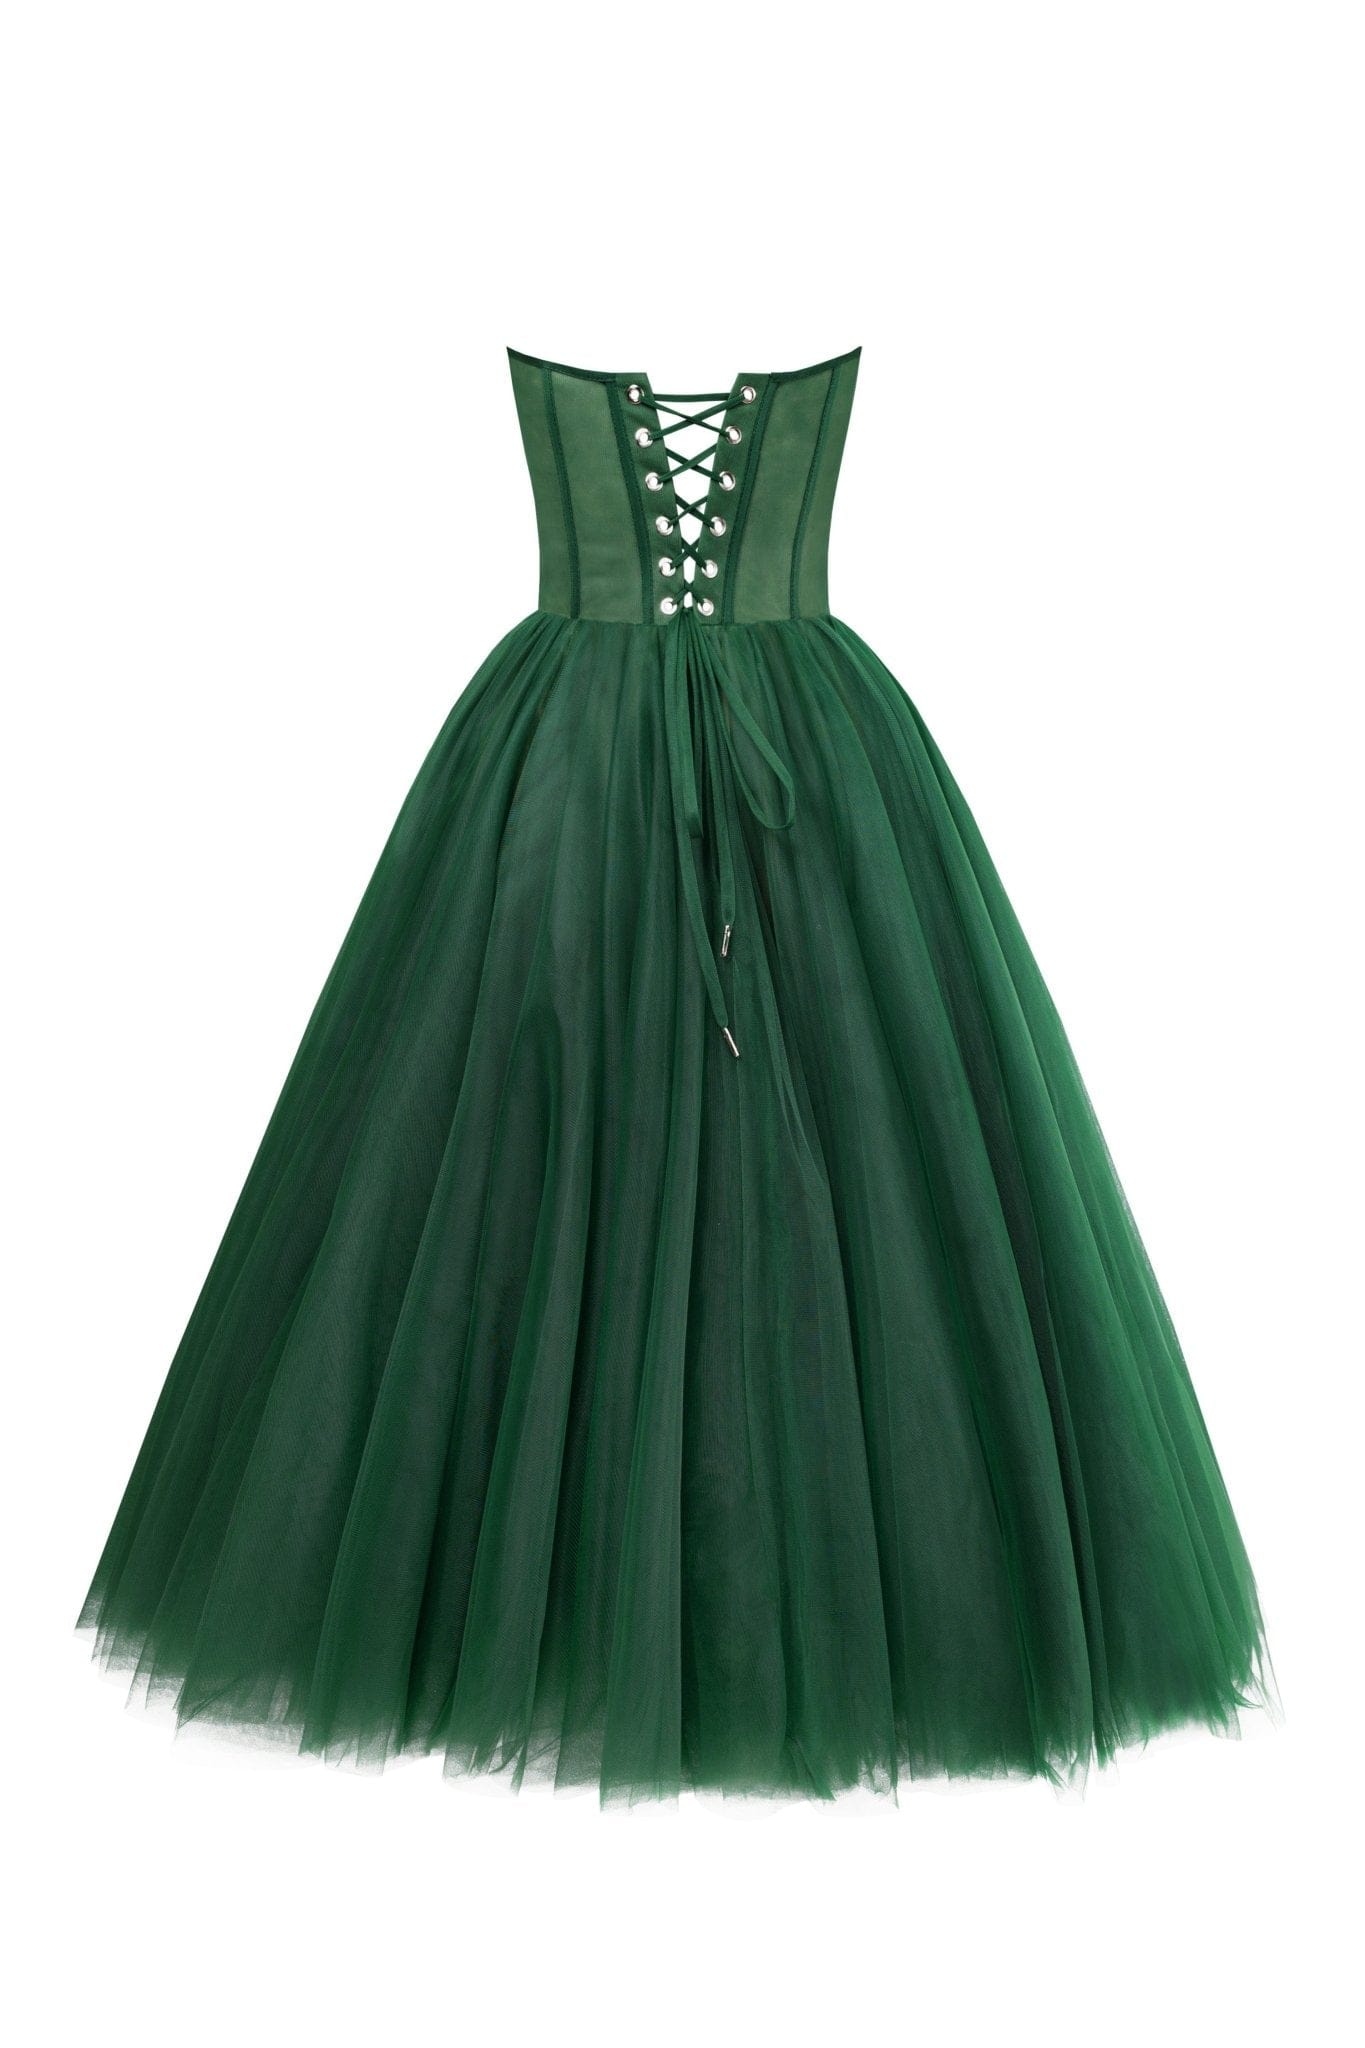 Emerald Green Old Hollywood Style Satin Gown | Deco Shop